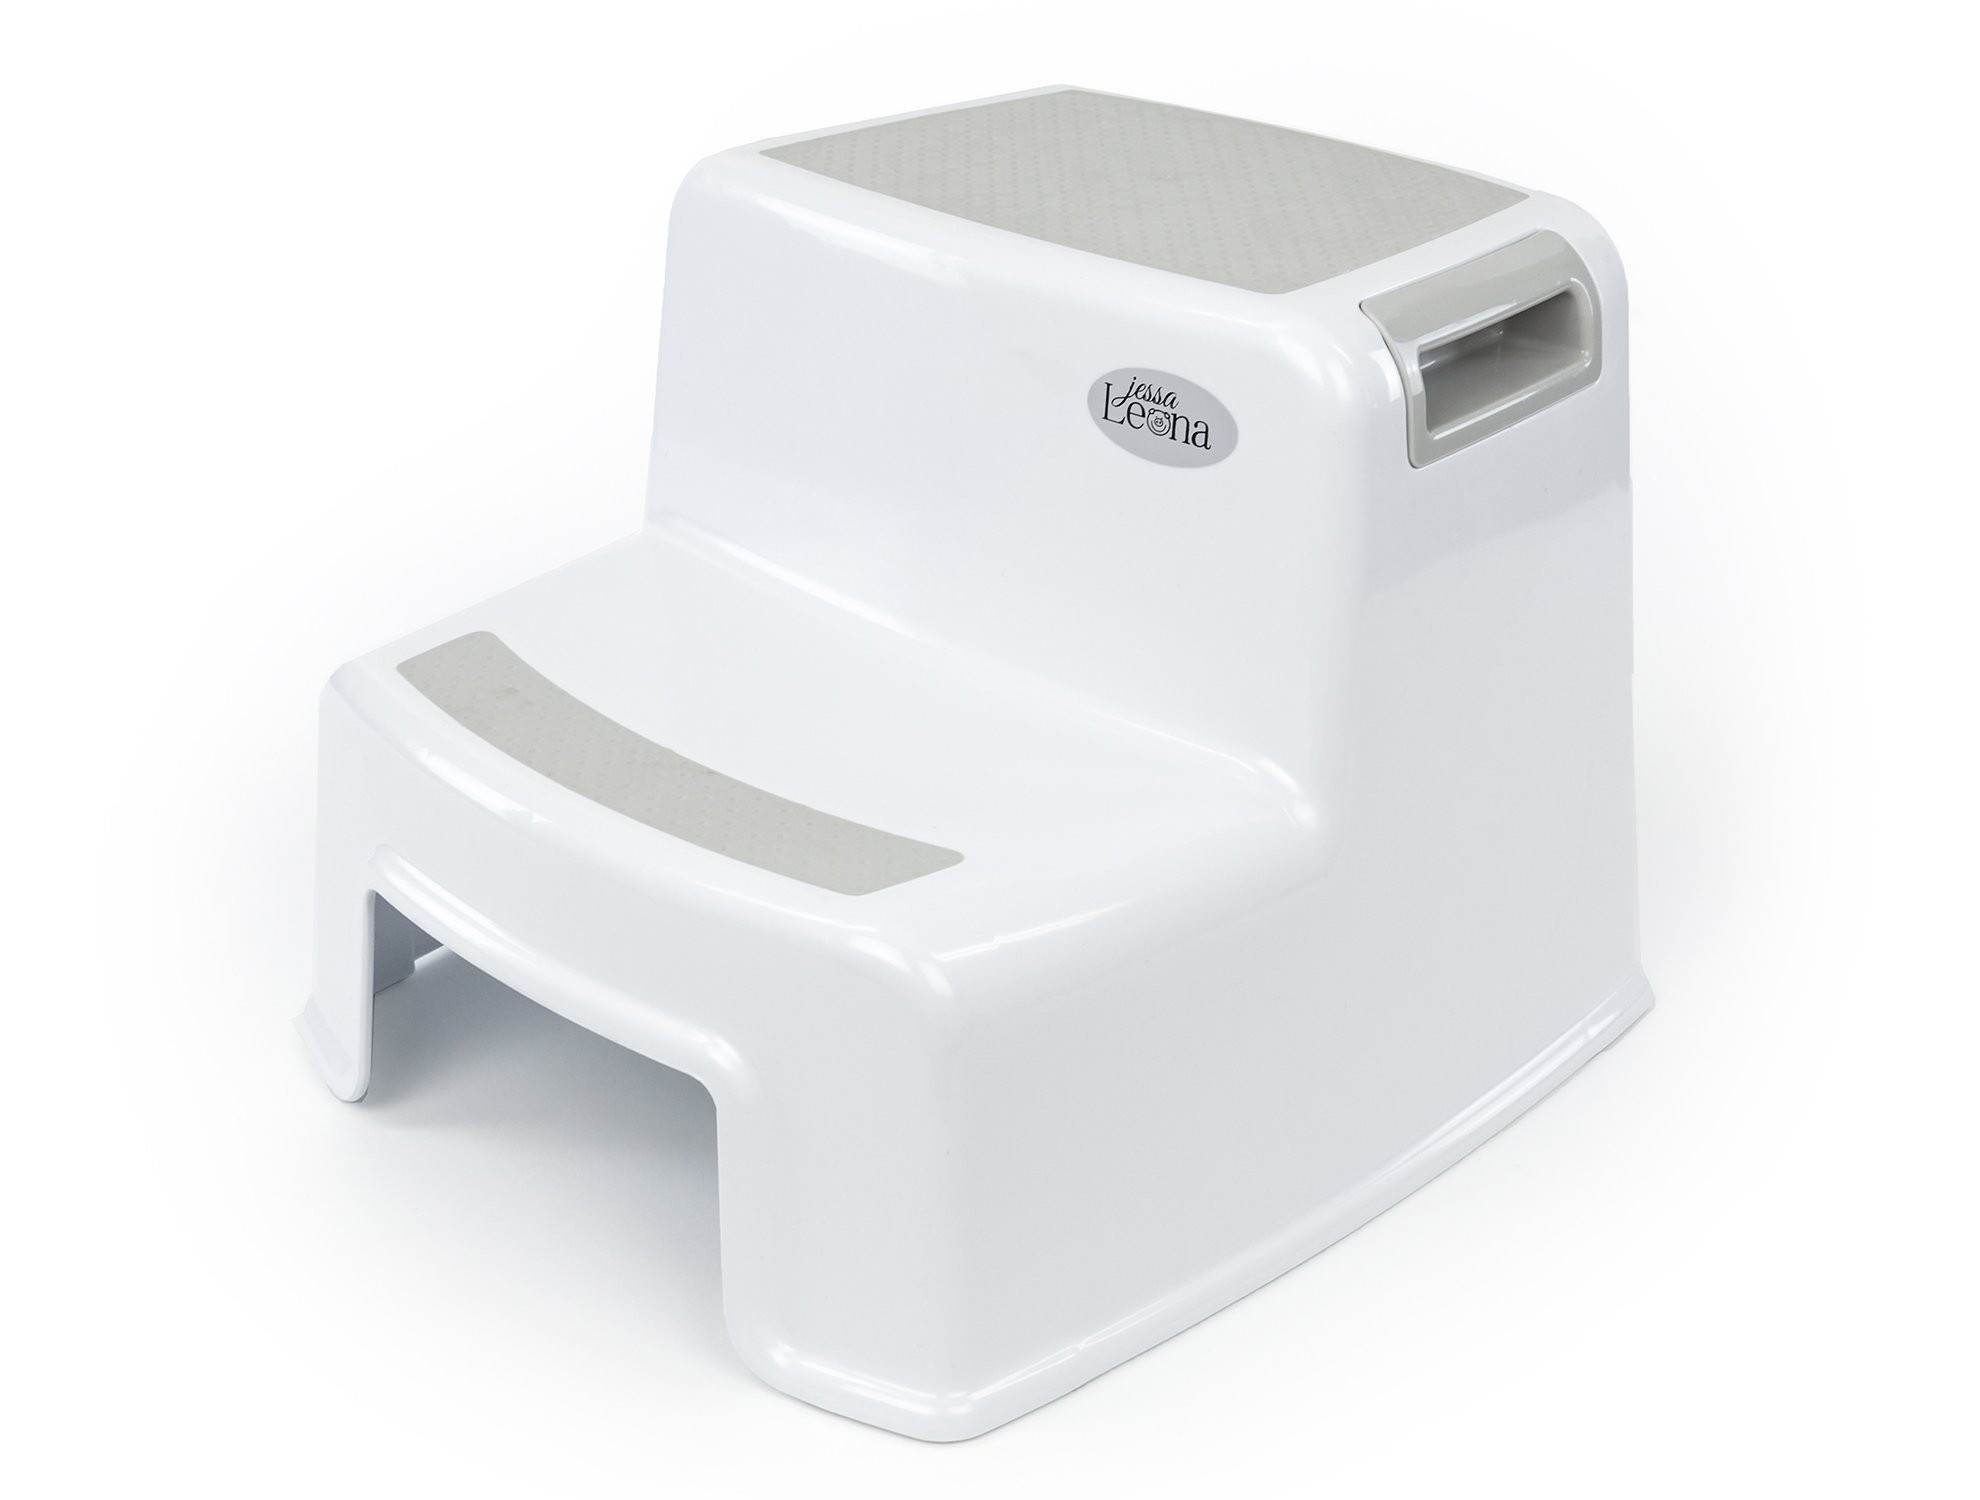 Kids Bathroom Step Stool
 Top 10 best step stools for kid in 2018 reviews without